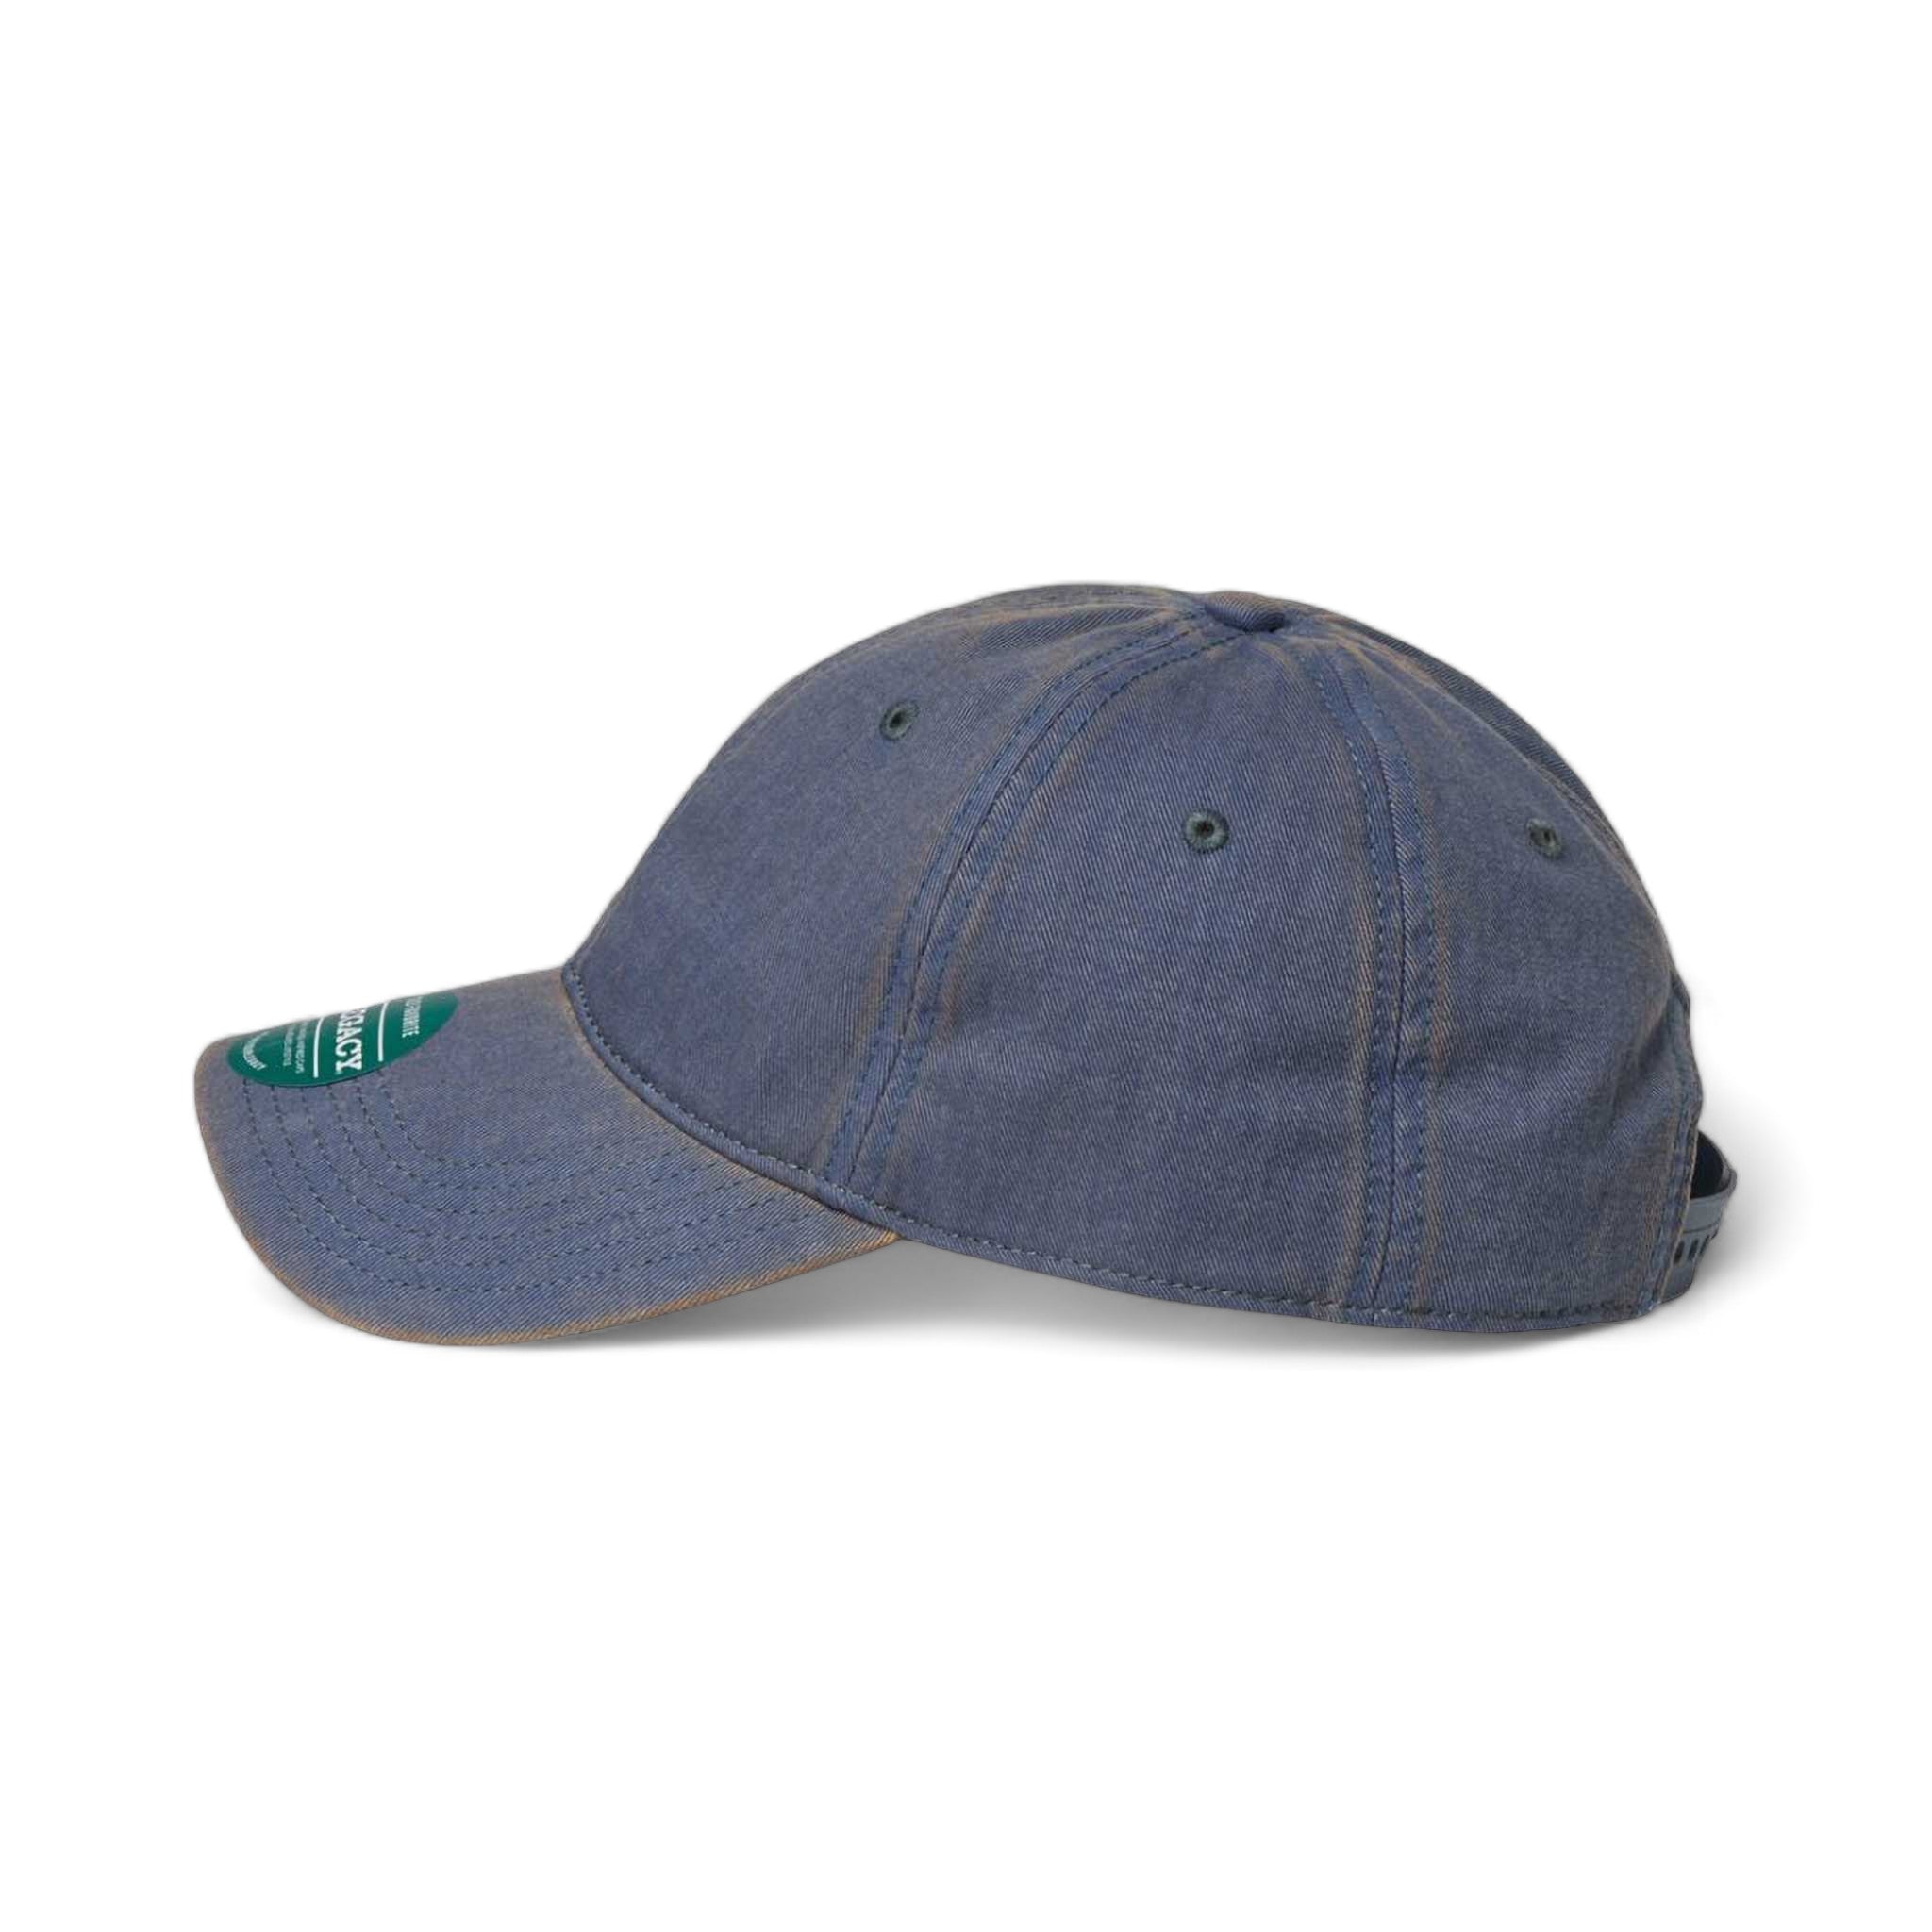 Side view of LEGACY OFAST custom hat in blue